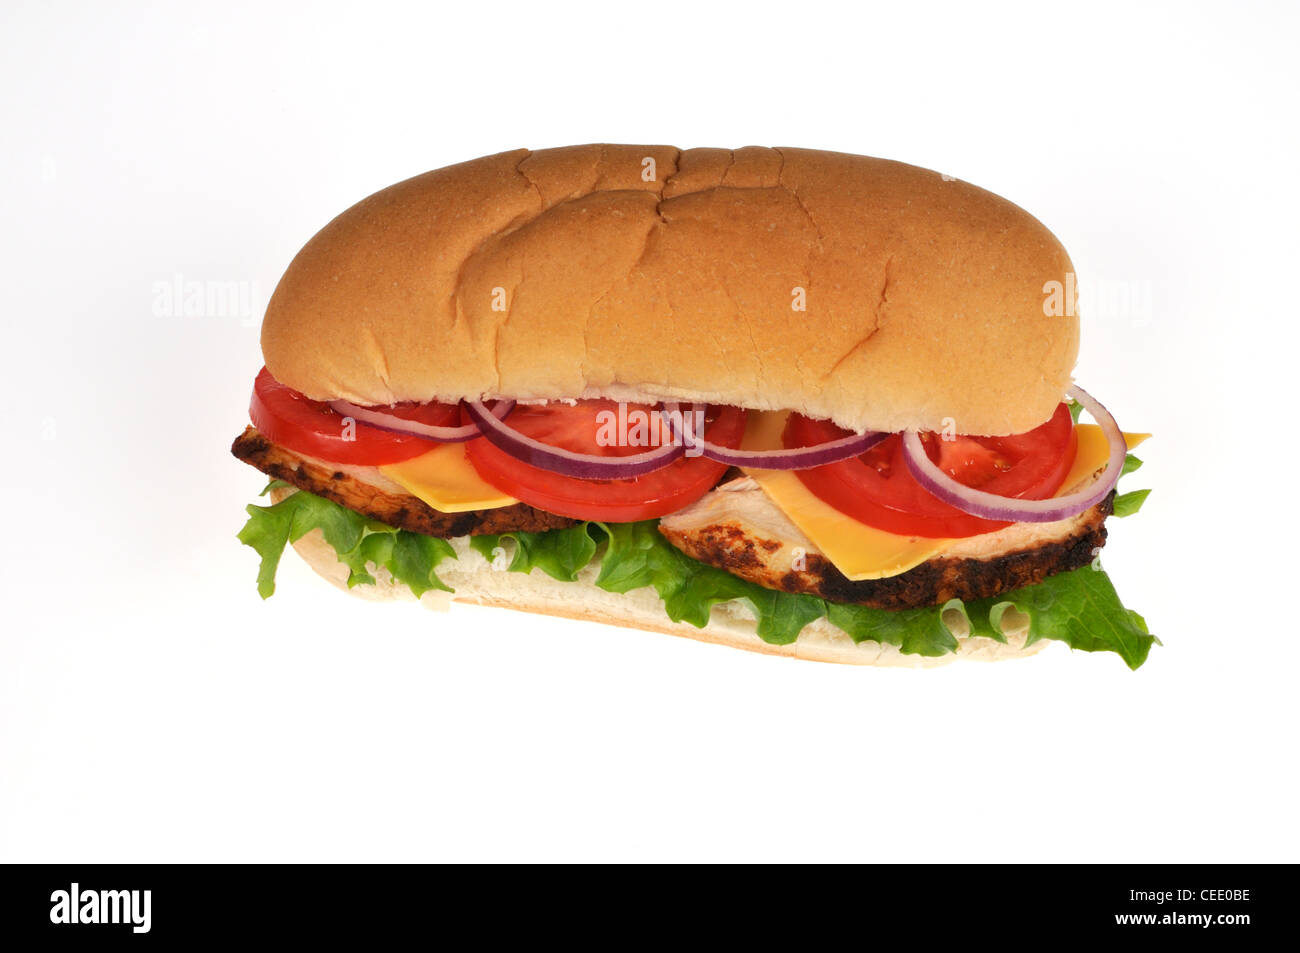 Sliced rotisserie chicken sub sandwich with cheese lettuce, tomato, red onion salad in bread roll on white background cutout. Stock Photo